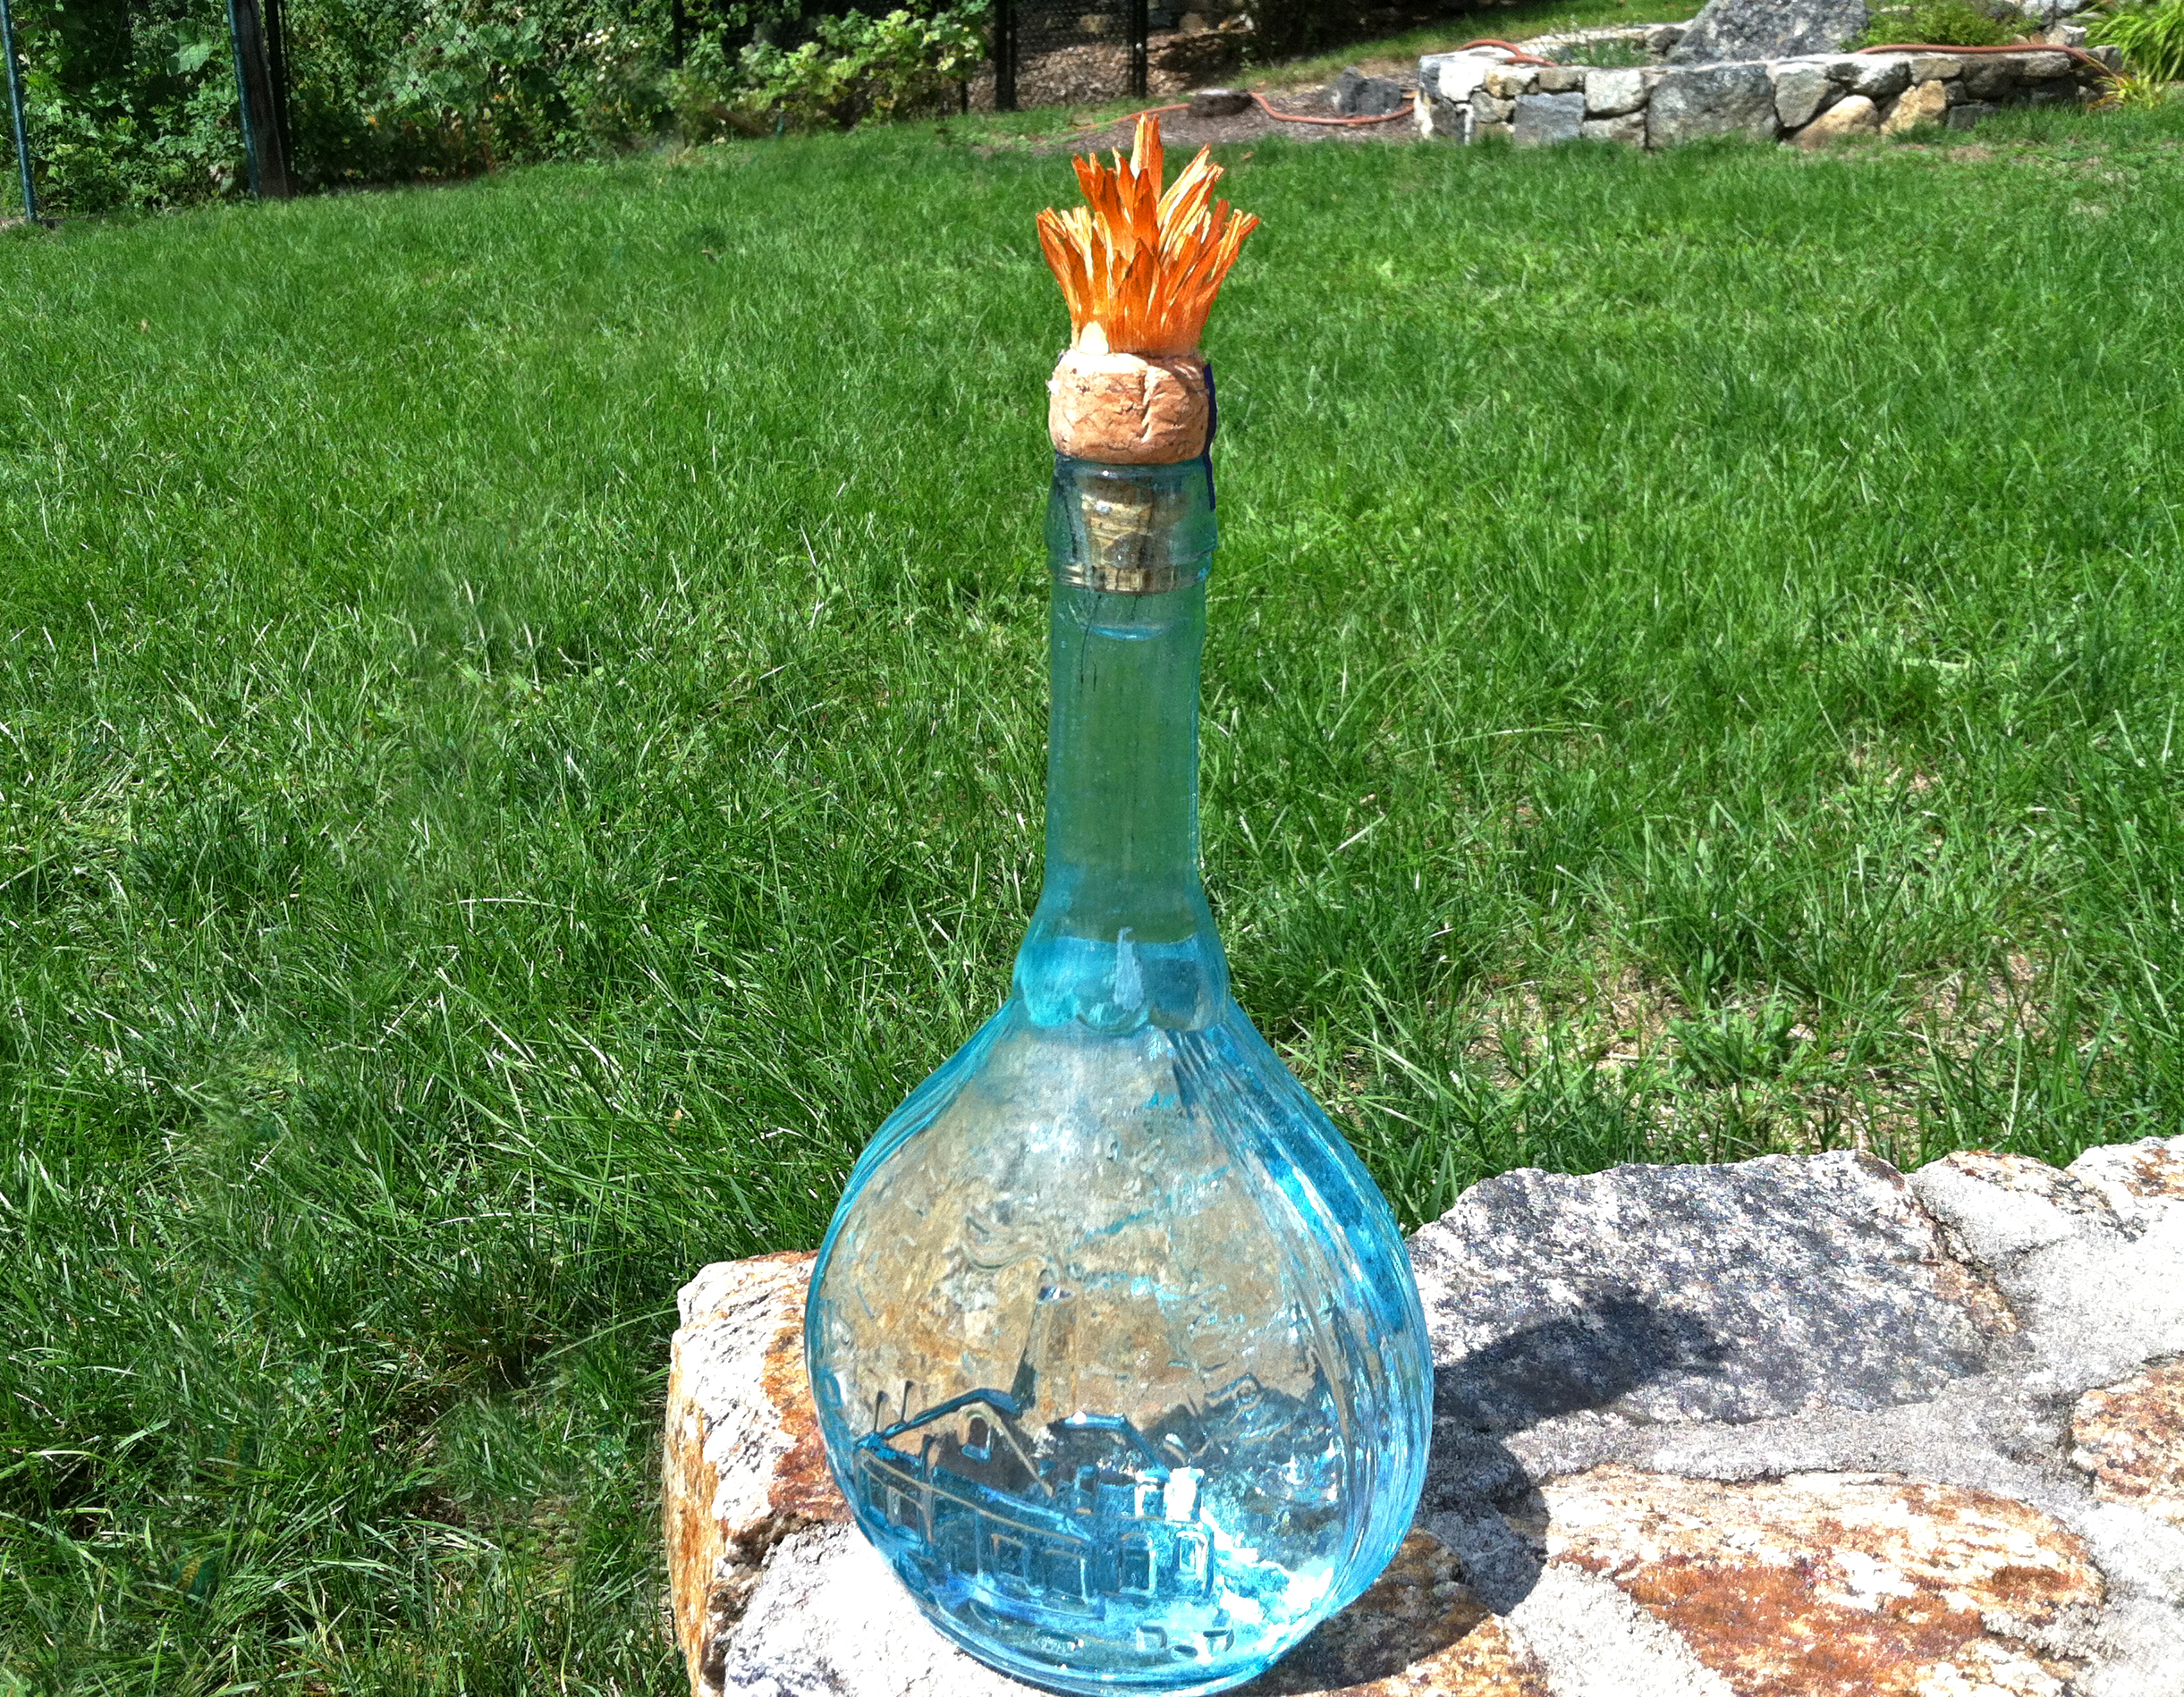  Sanded a custom cork stopper and created a faux agave plant&nbsp; 